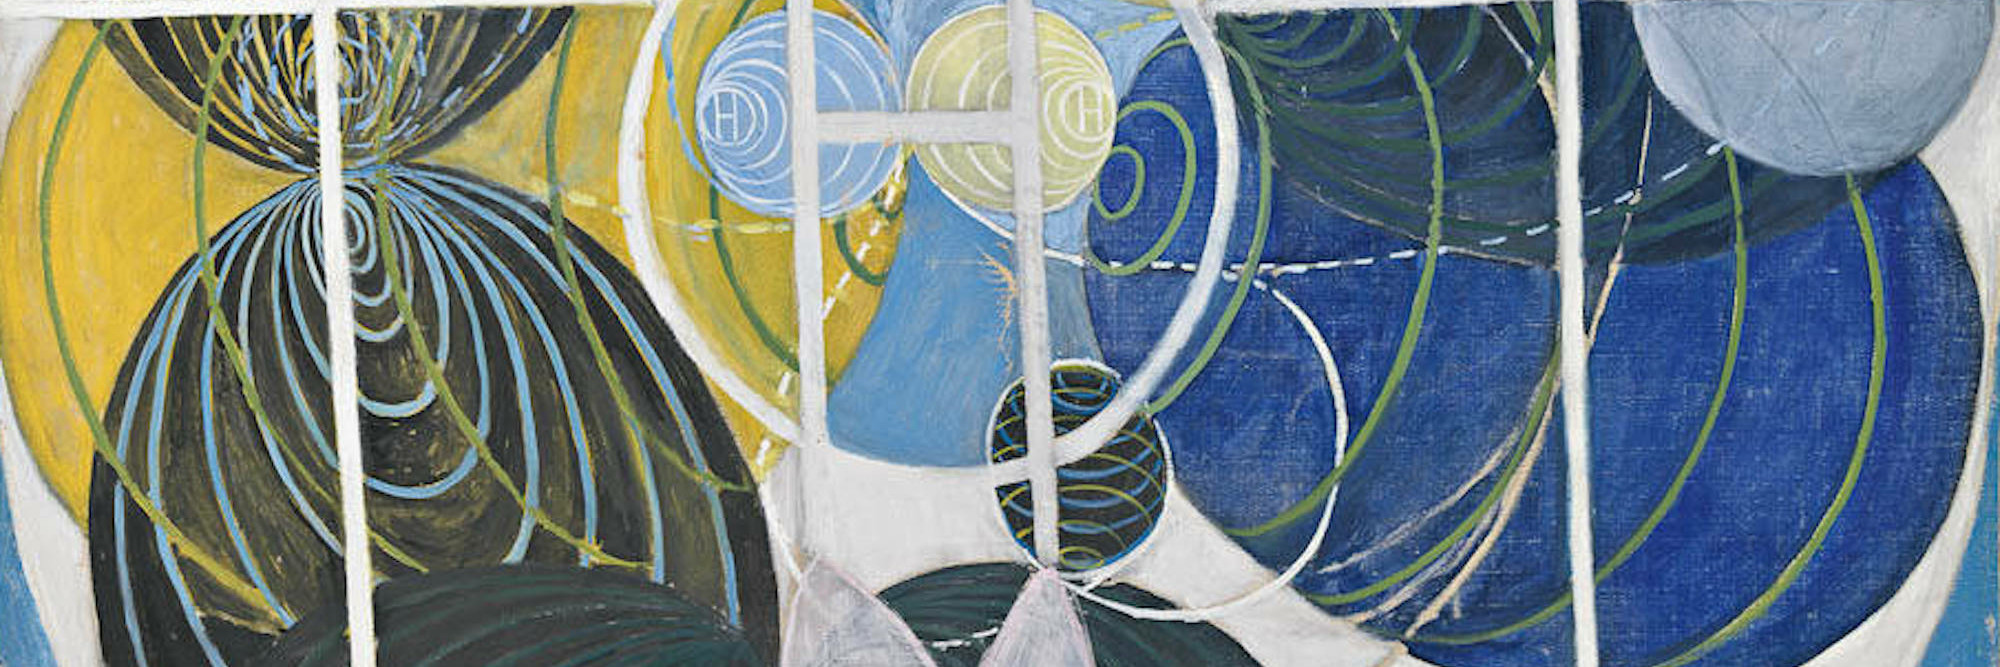 Hilma af Klint. The Large Figure Paintings, The WU/Rose Series, Group III No 5, The Key to All Work to Date. 1907. Oil on canvas, 59 1/16 × 46 7/16&#34; (150 × 118 cm). Photo: Albin Dahlström